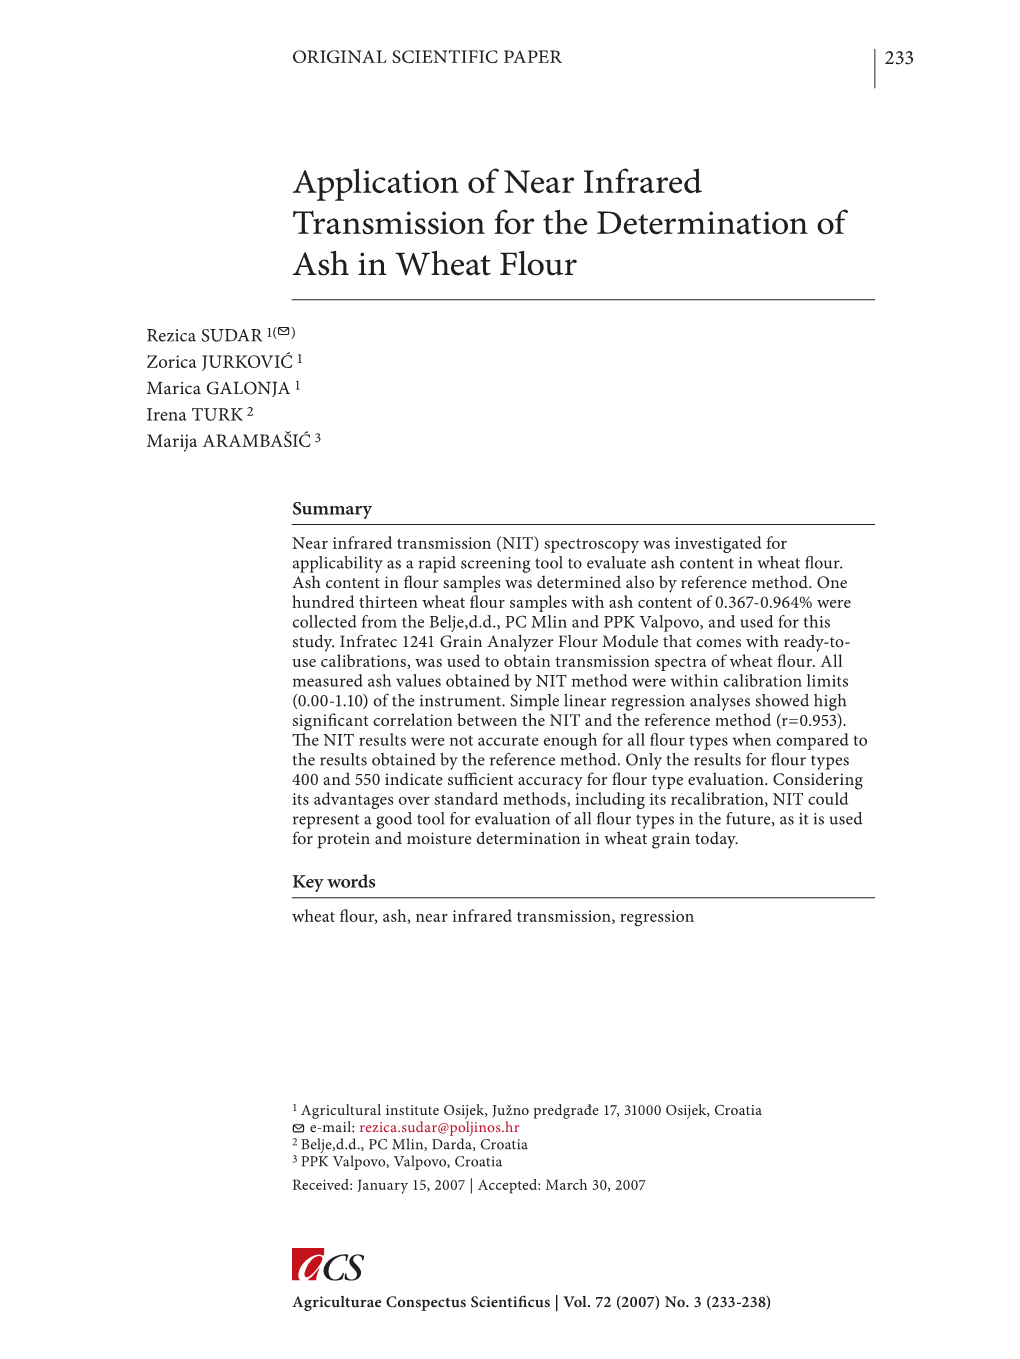 Application of Near Infrared Transmission for the Determination of Ash in Wheat Flour